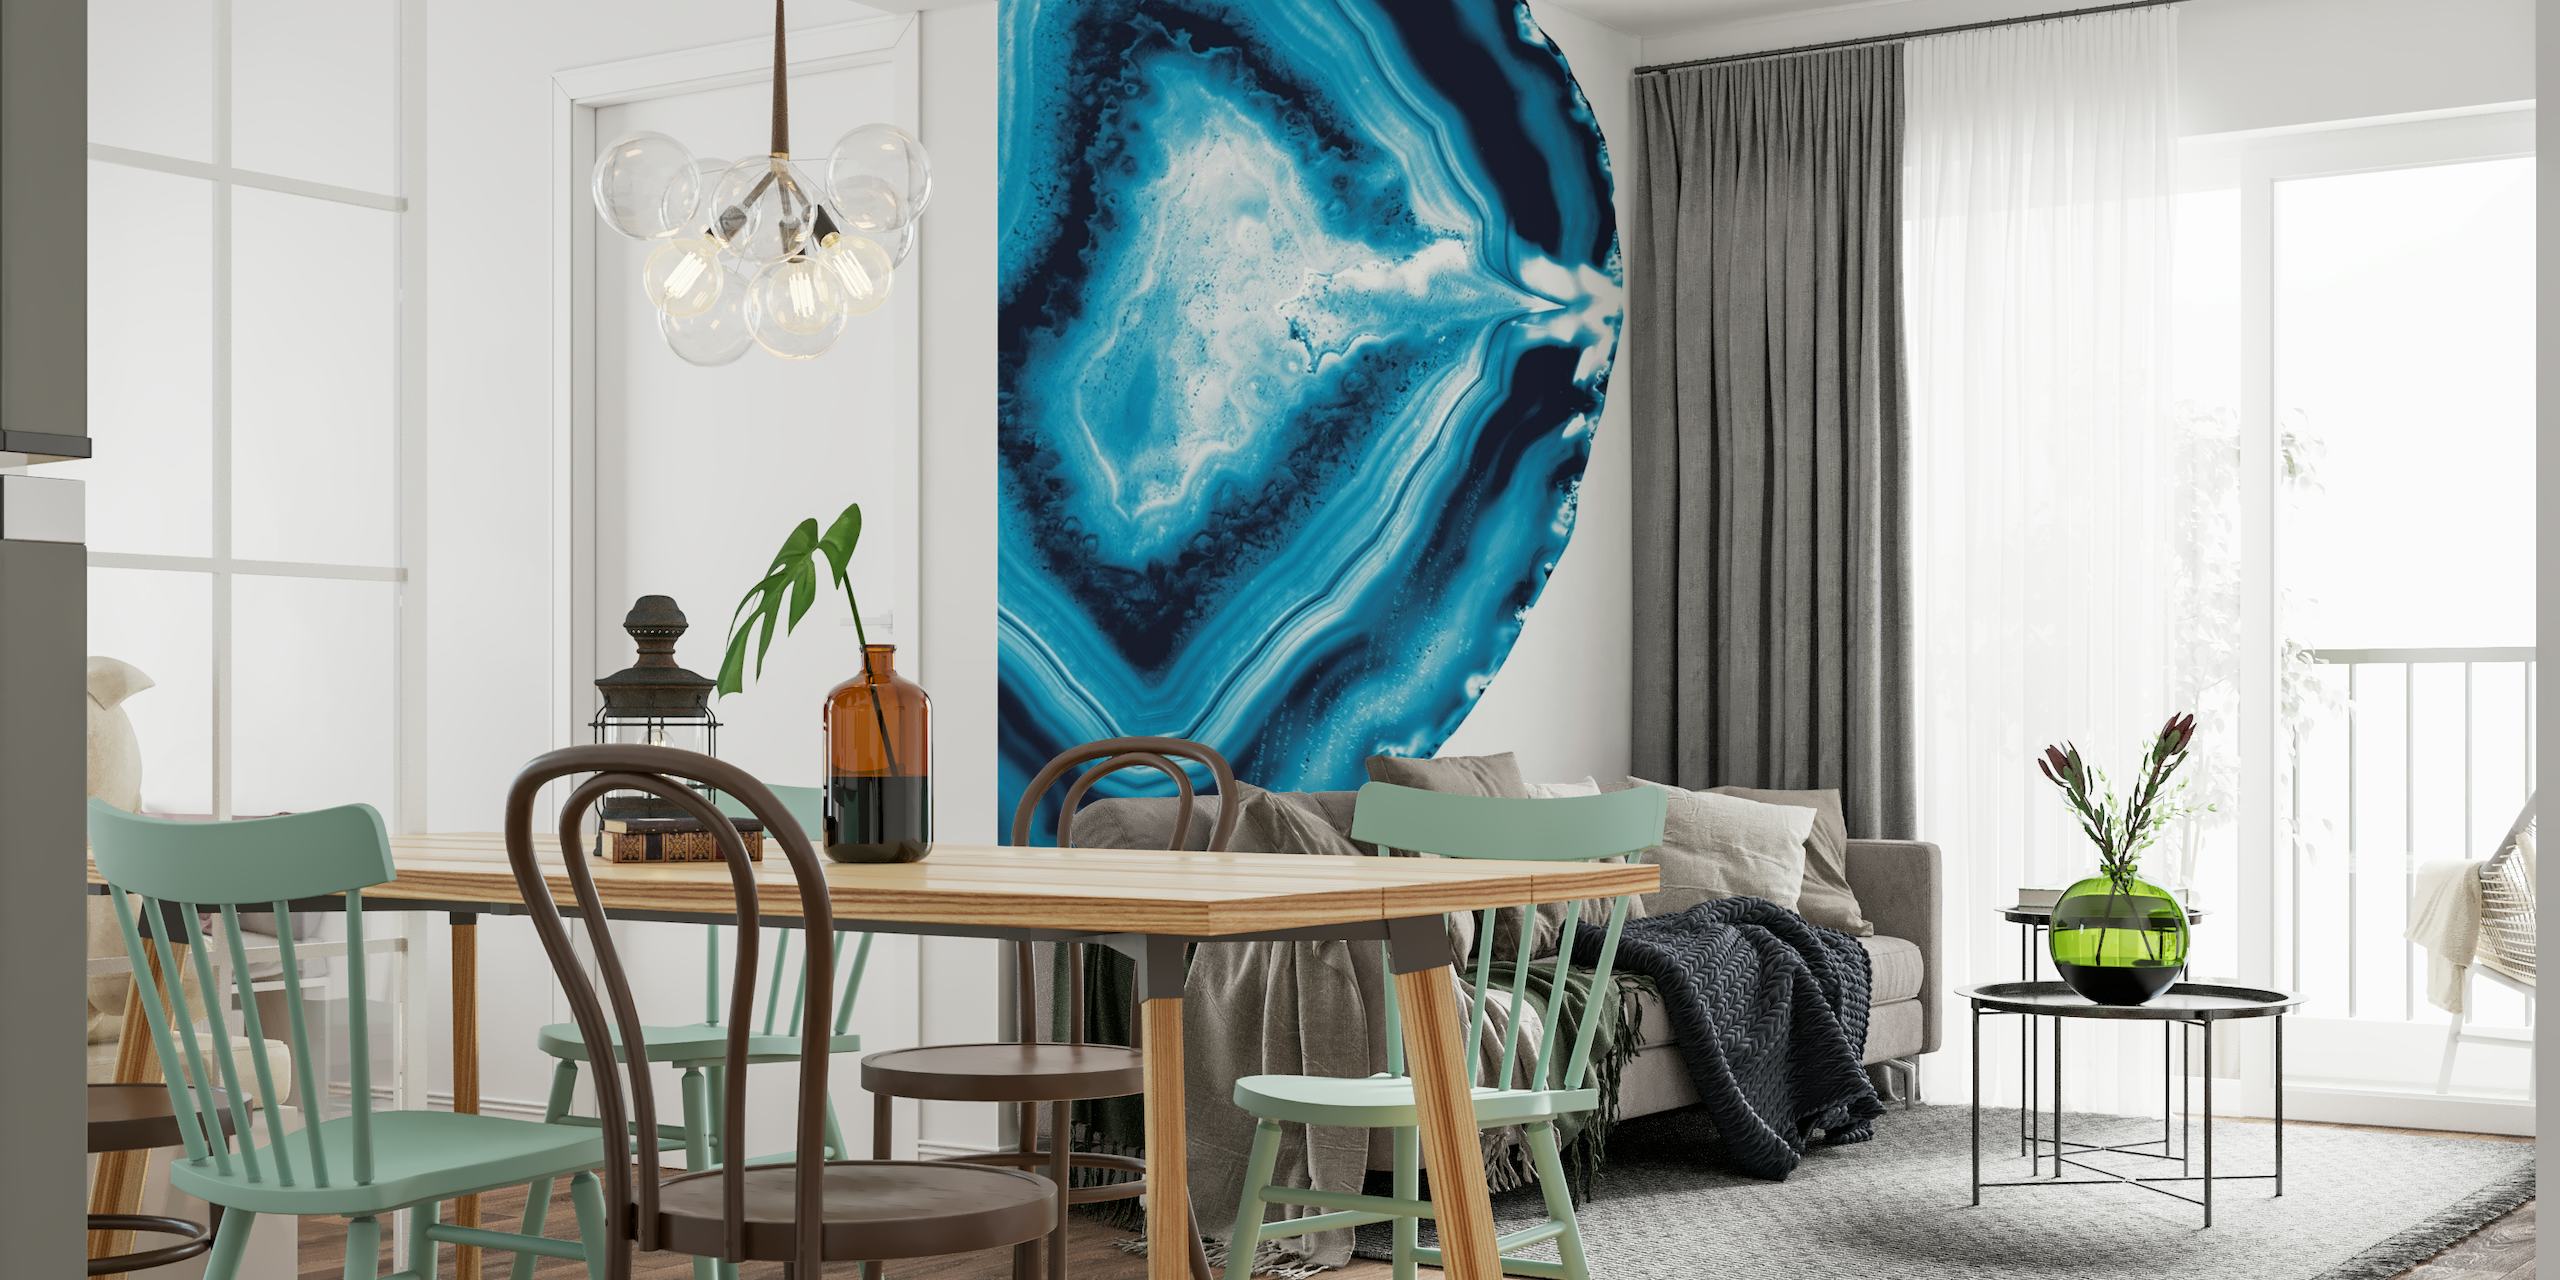 Blue Agate wall mural with vibrant blue swirls and white accents